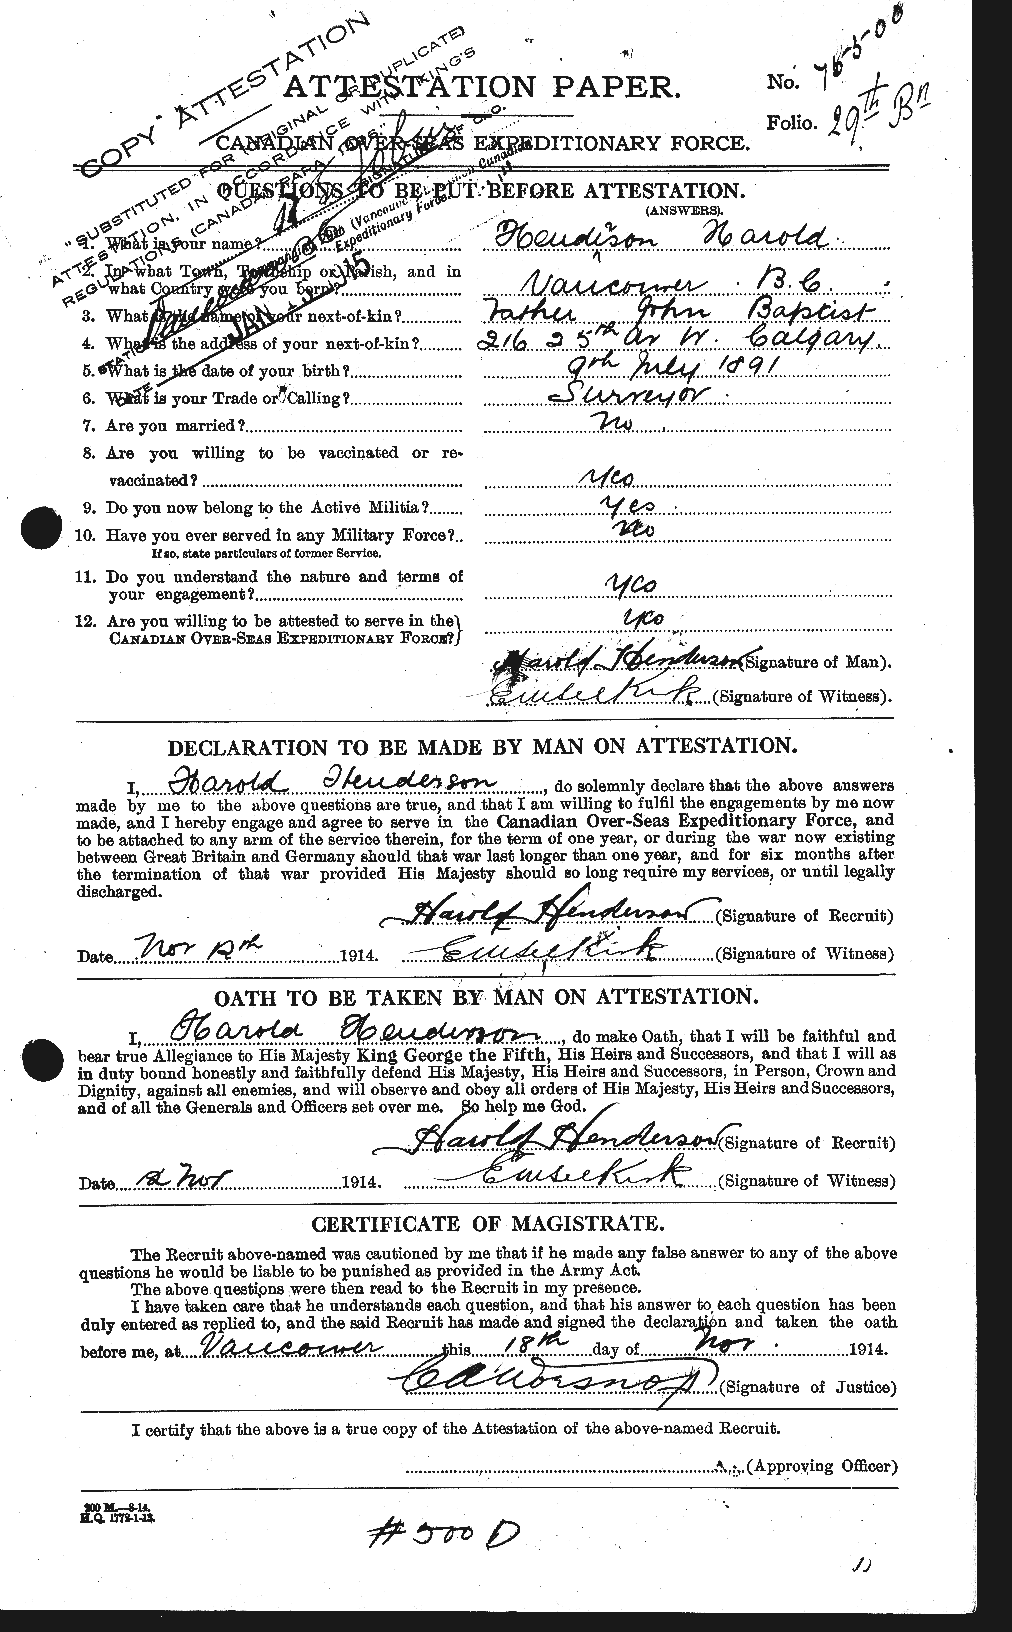 Personnel Records of the First World War - CEF 390280a